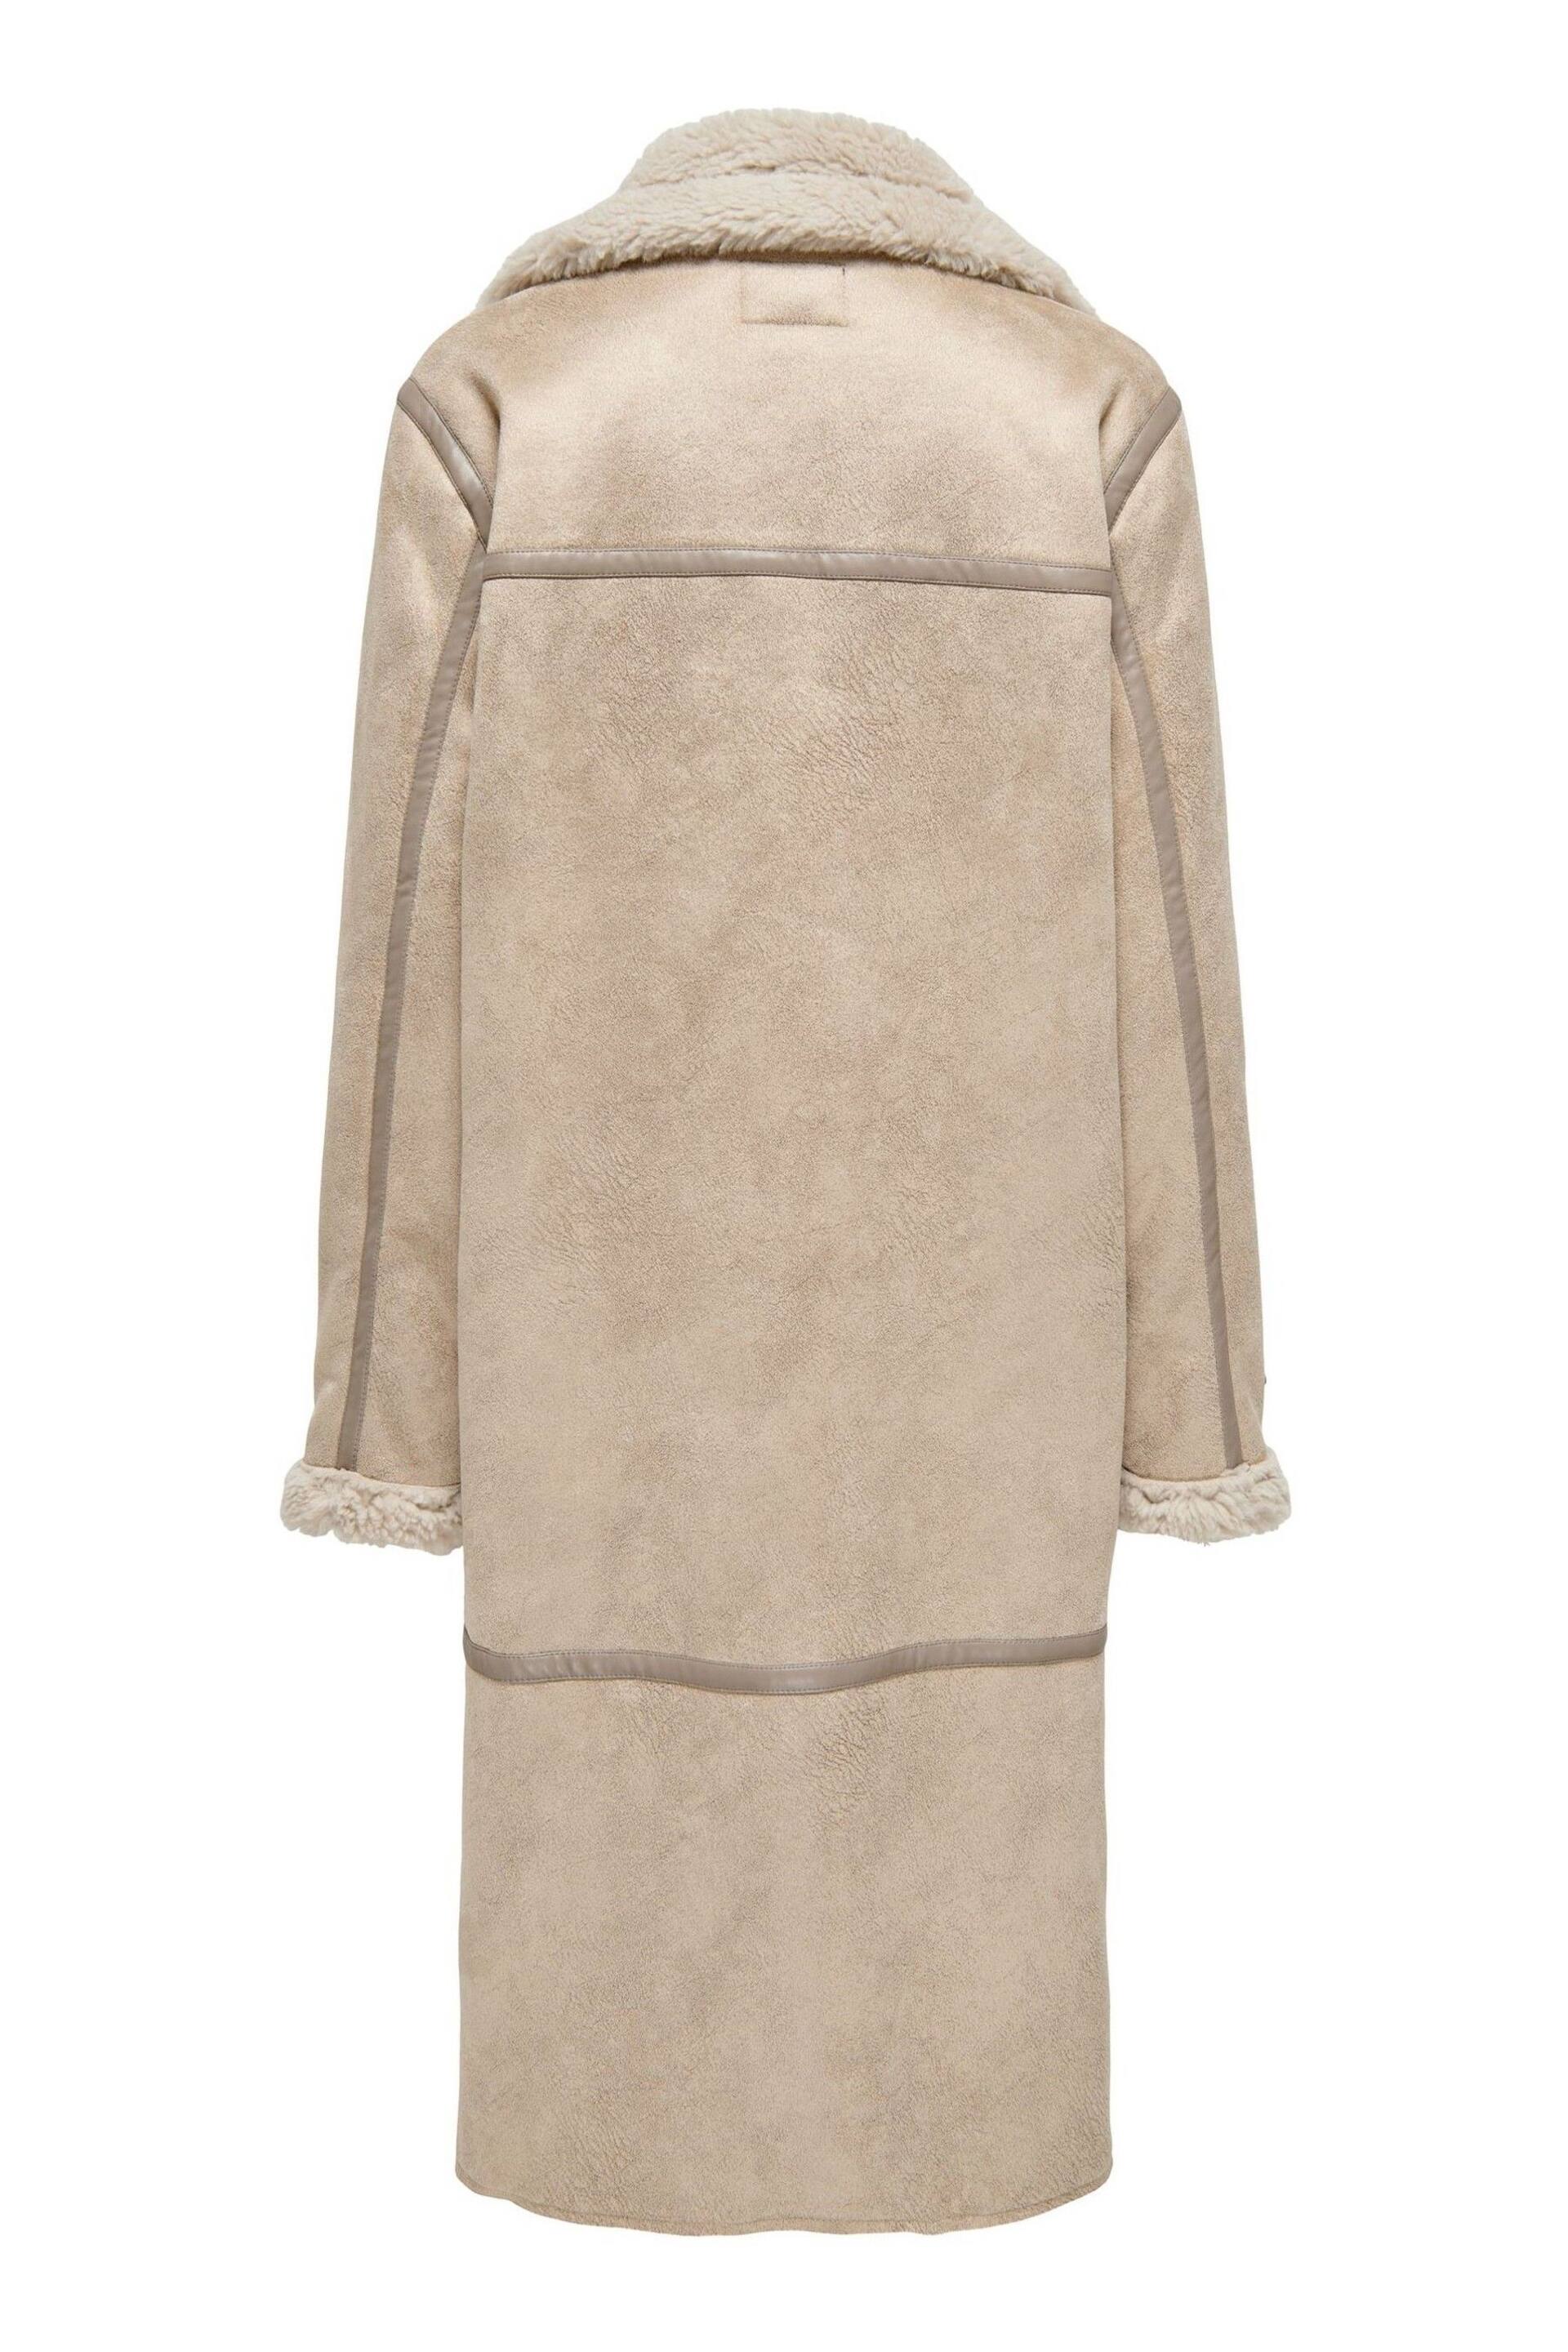 ONLY Cream Longline Cosy Teddy Button Up Aviator Coat - Image 5 of 5